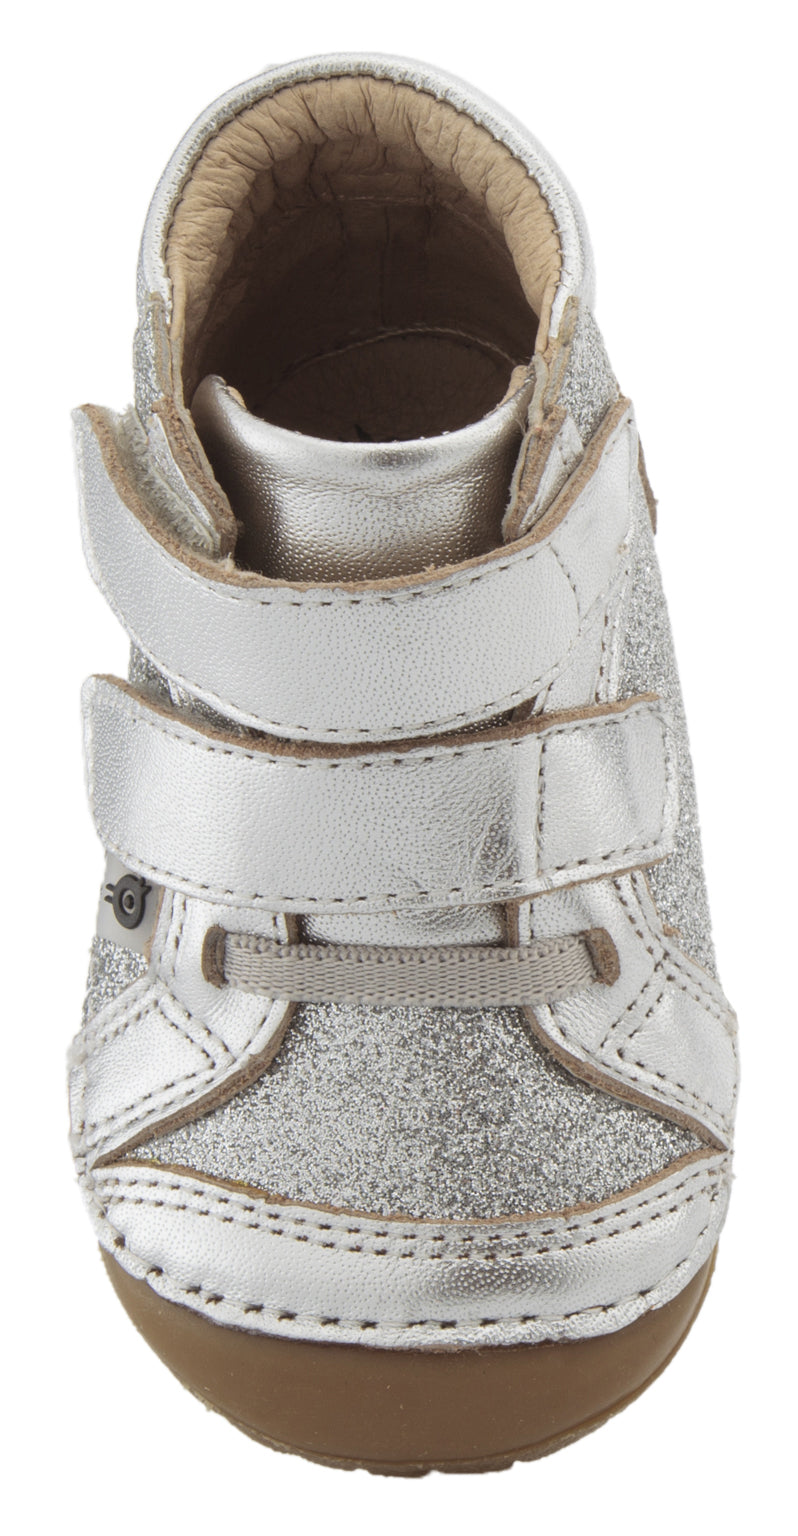 Old Soles Girl's & Boy's 4054 Glamster Pave Sneakers - Silver/Glam Argent